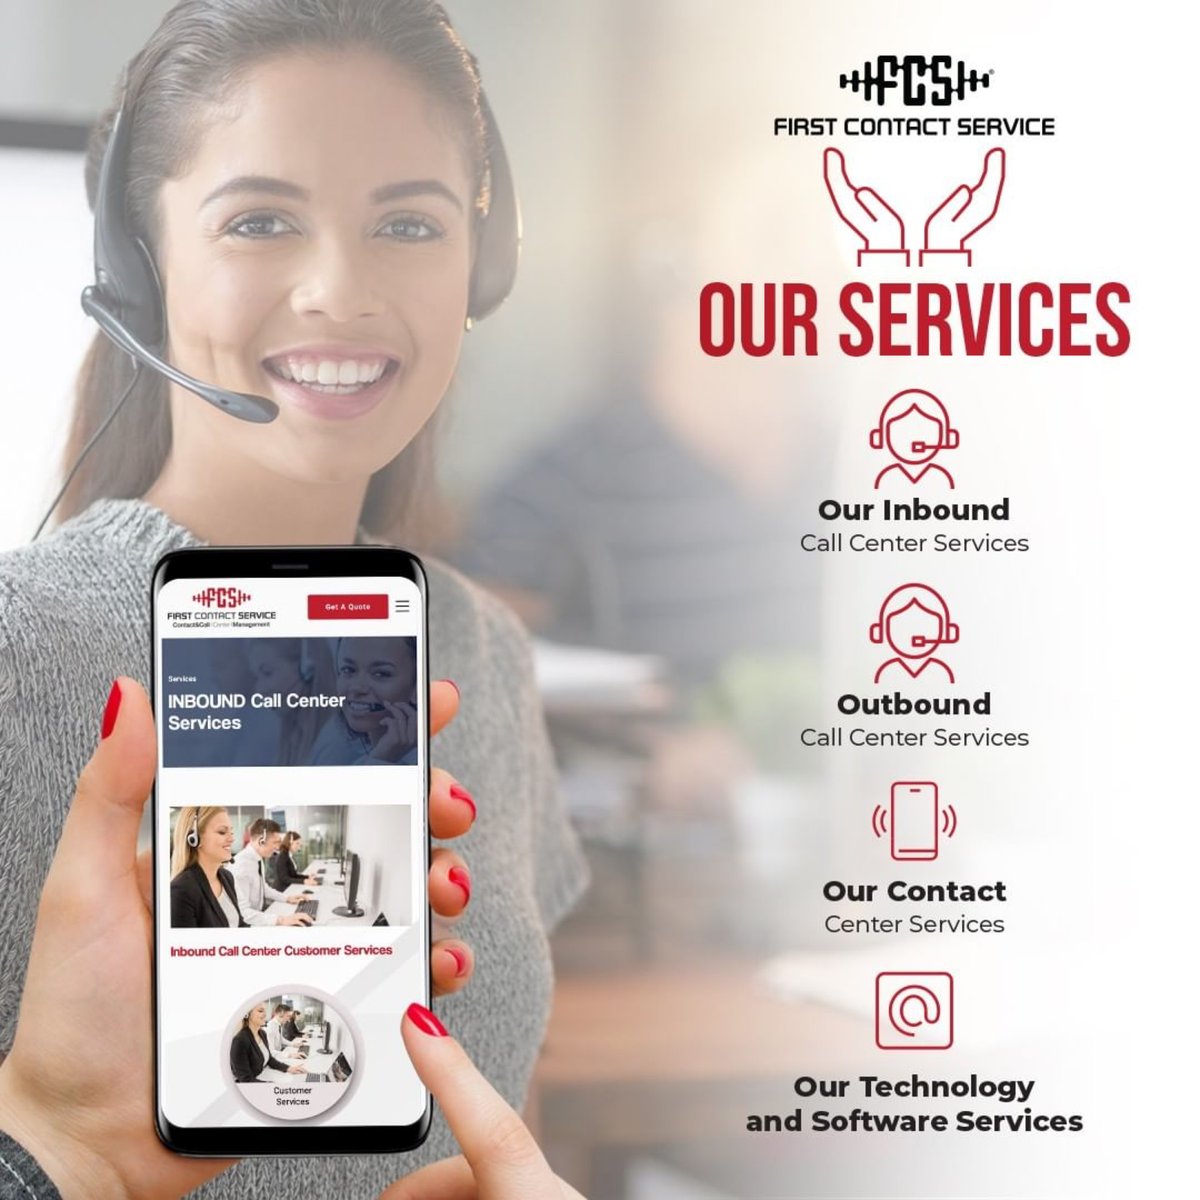 We are trained, professional, experienced, and efficient! From call center solutions to full-service Inbound & Outbound calls to virtual assistant services and more, we are ready to help your business!
#customerservice #virtualassistant #customersupport #callcentersolutions